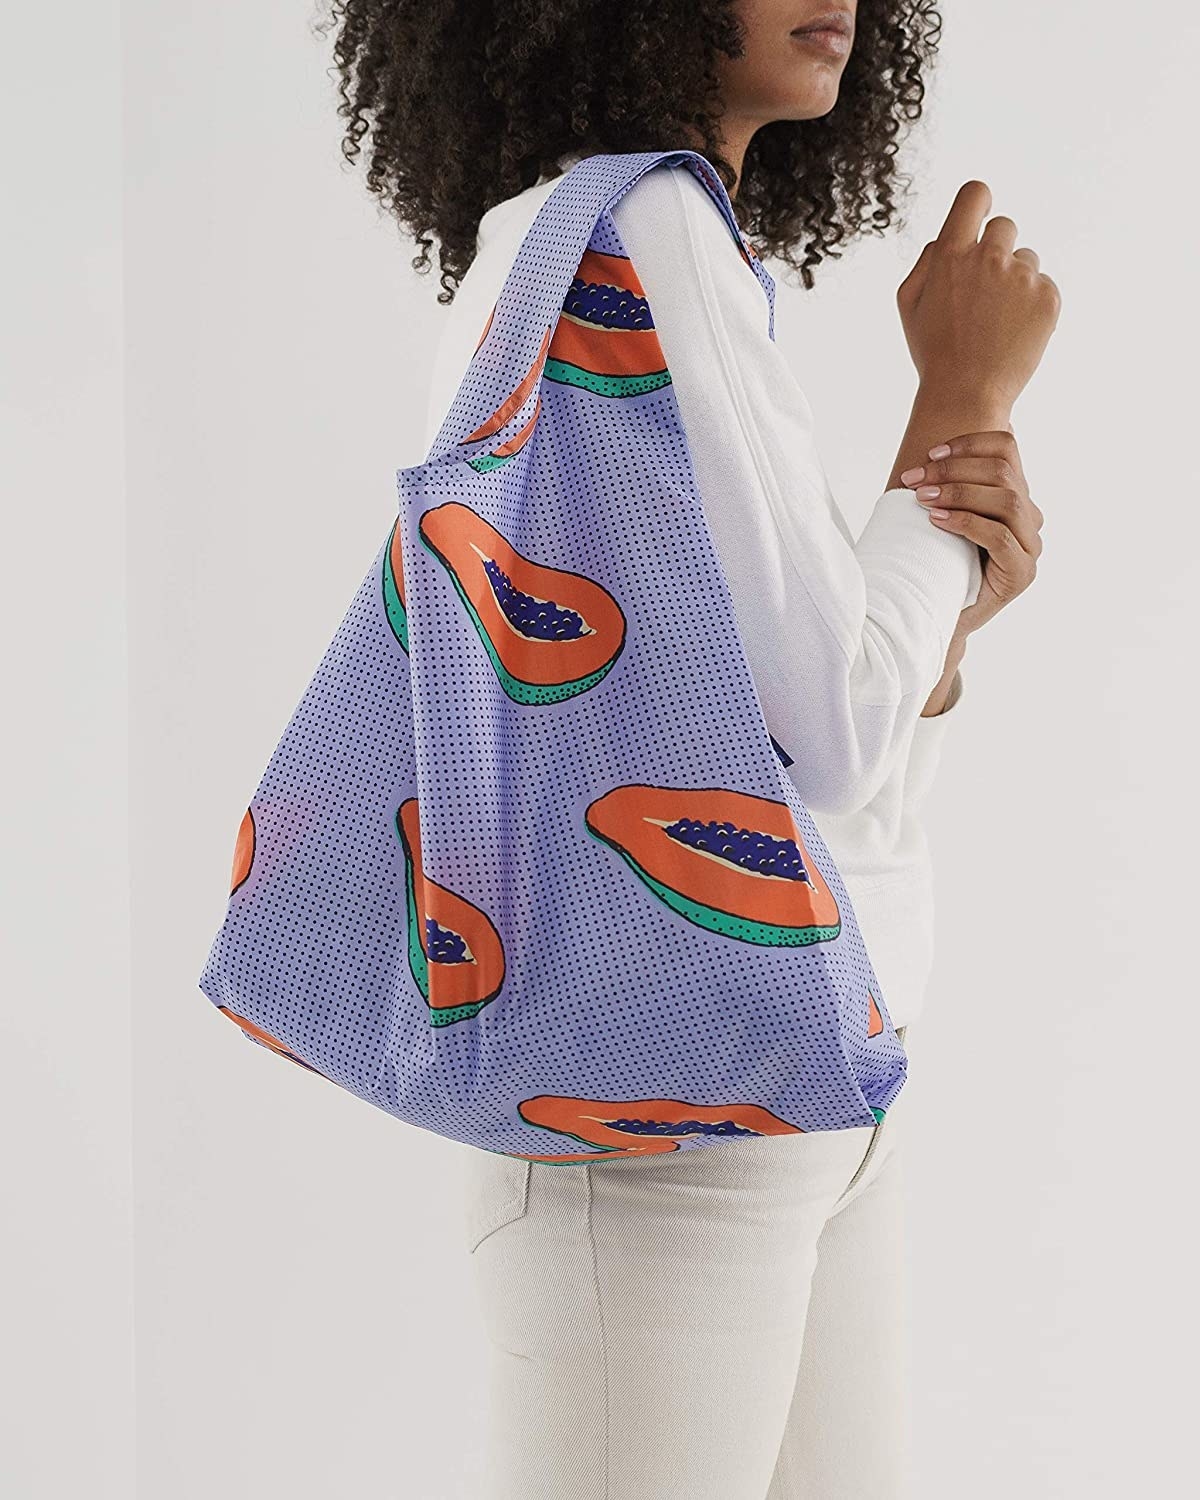 A model wearing the reusable bag on their shoulder